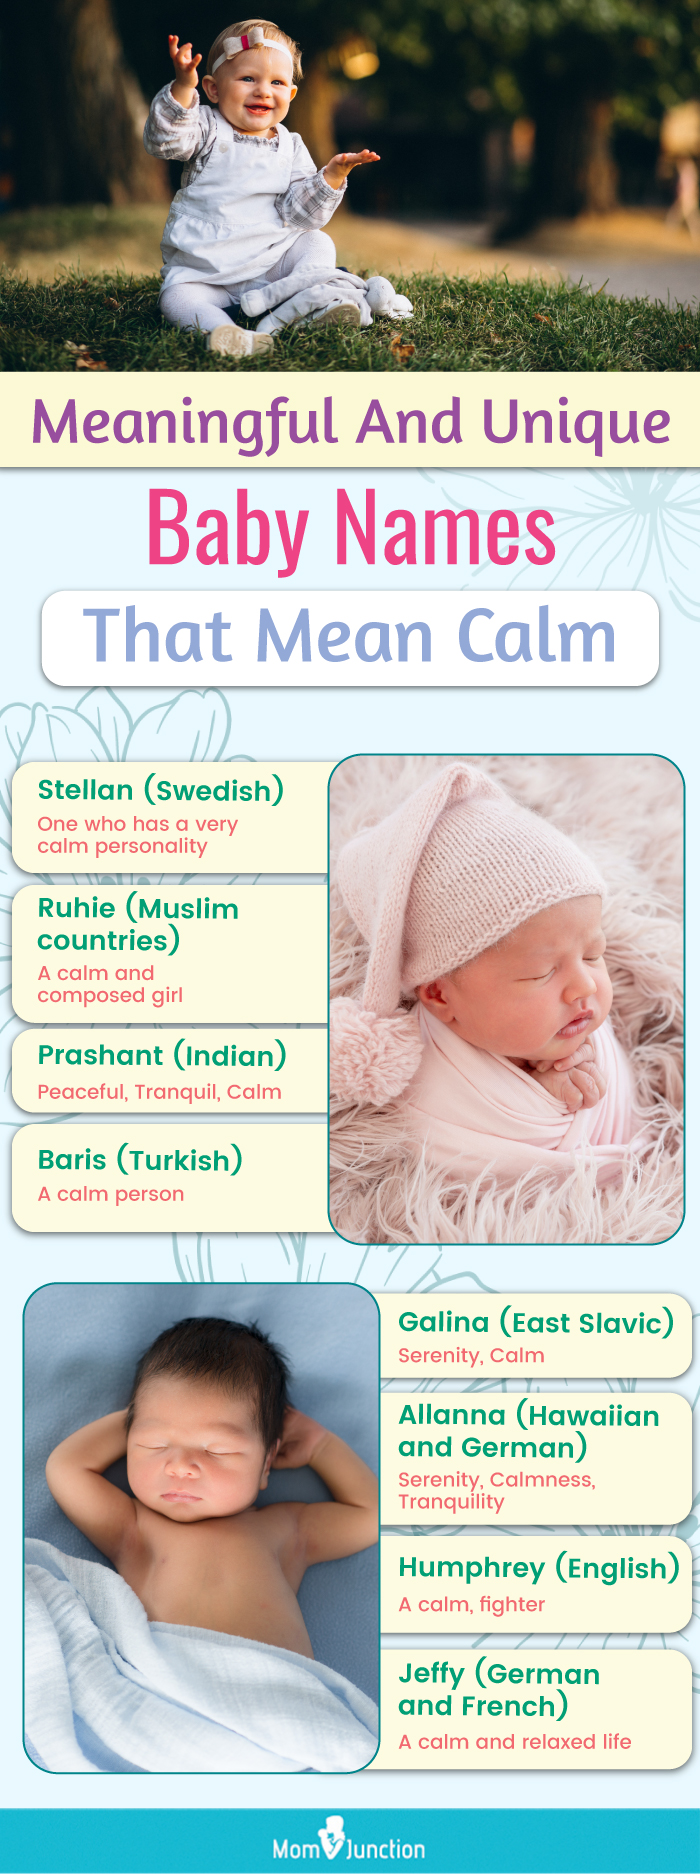 meaningful and unique baby names that mean calm (infographic)